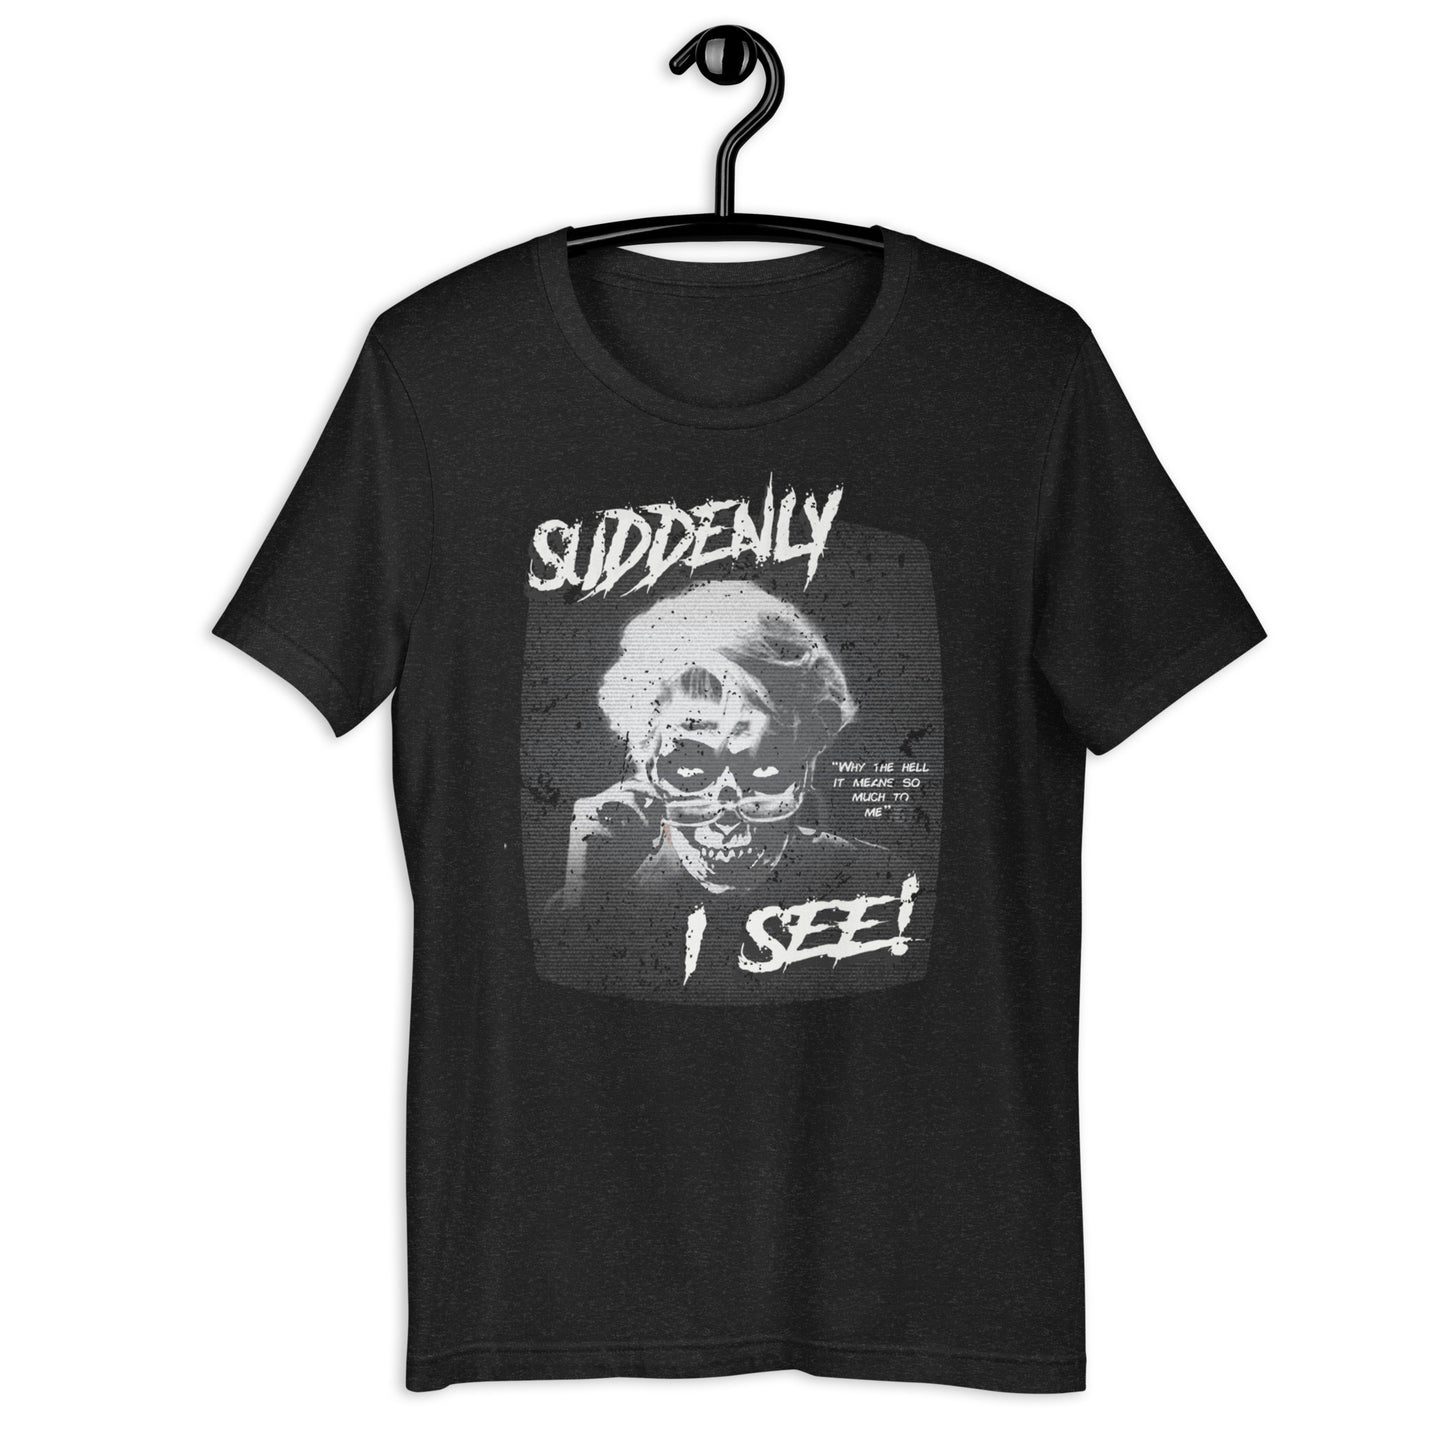 Suddenly I See Skelly Tour Dates Tee | Charcoal